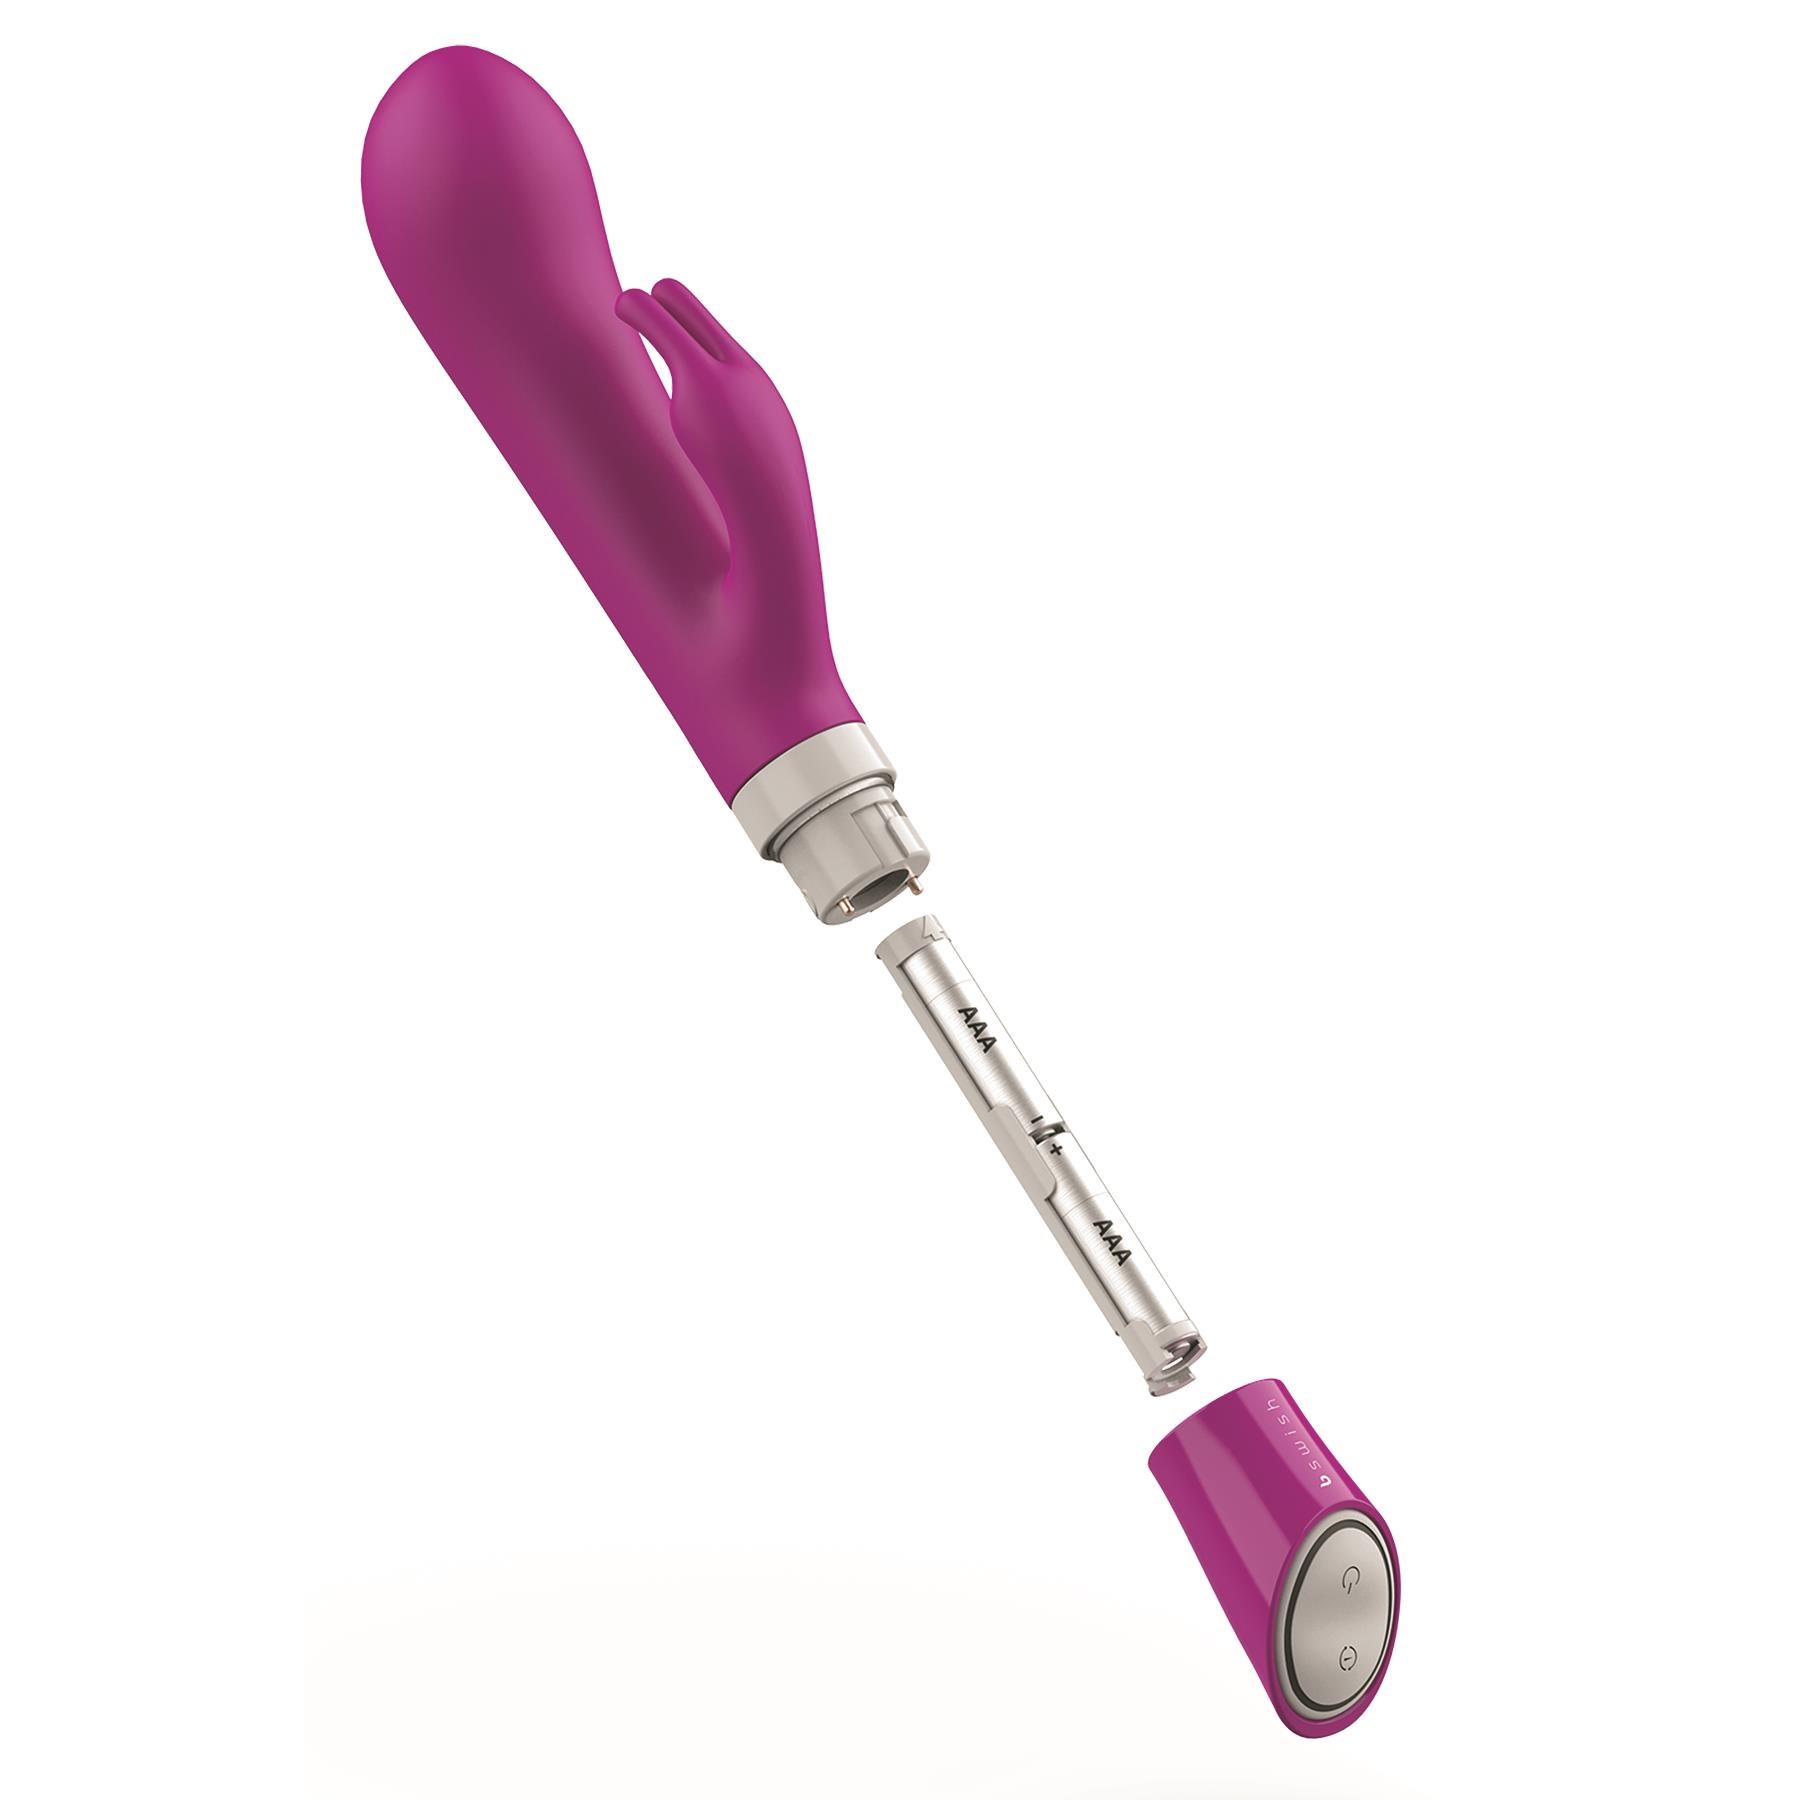 BSwish BWild Deluxe Bunny - Showing How Batteries are Placed in the Vibrator